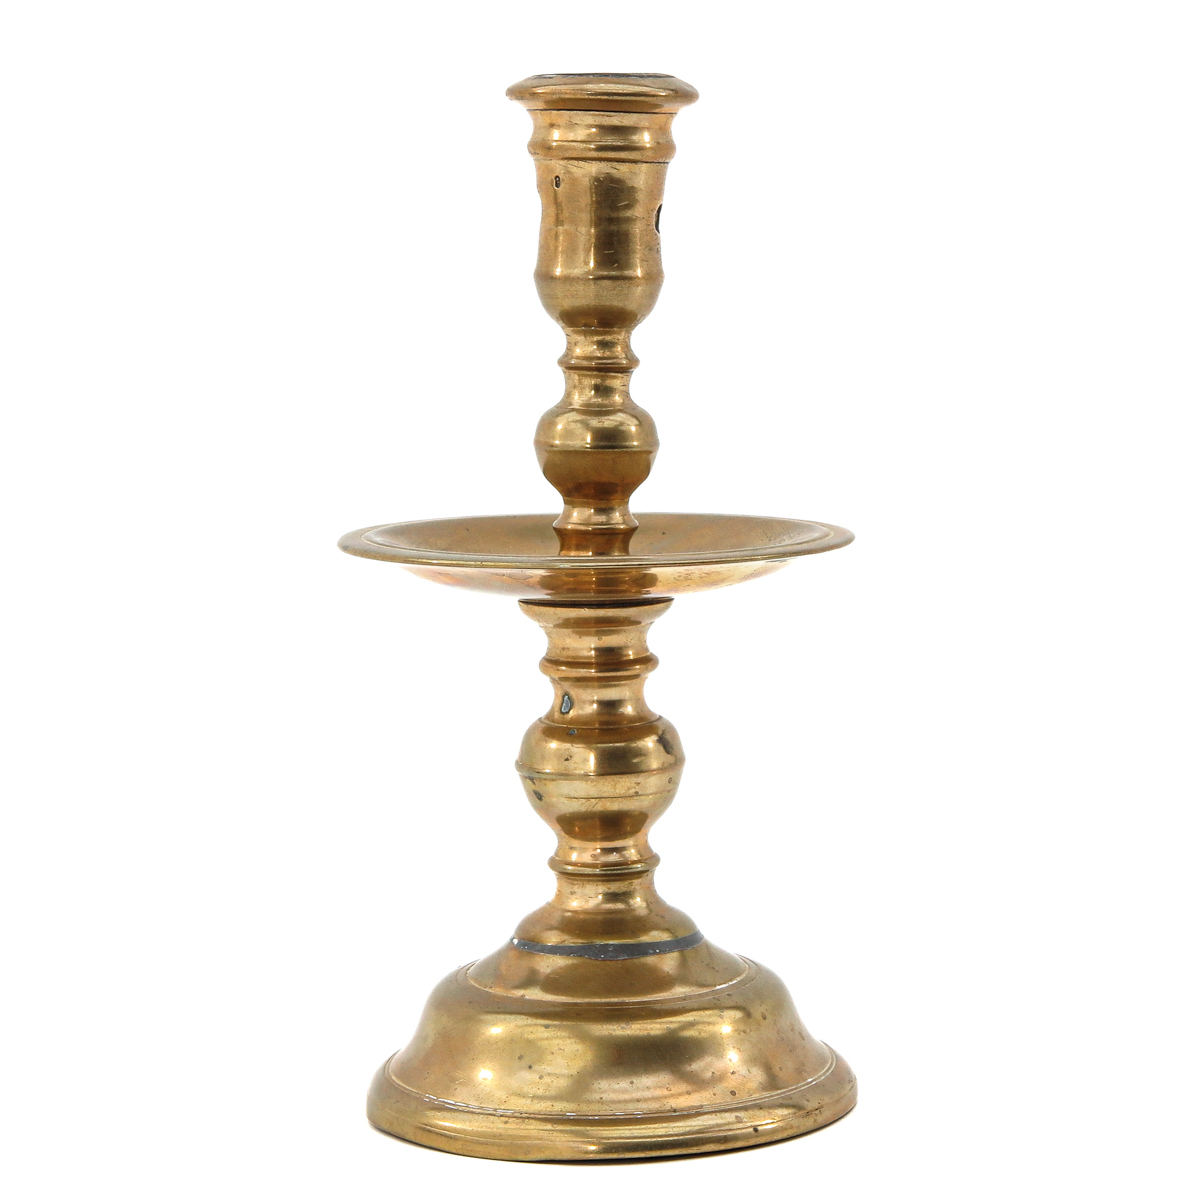 A 17th Century Bronze Candlestick - Image 3 of 8